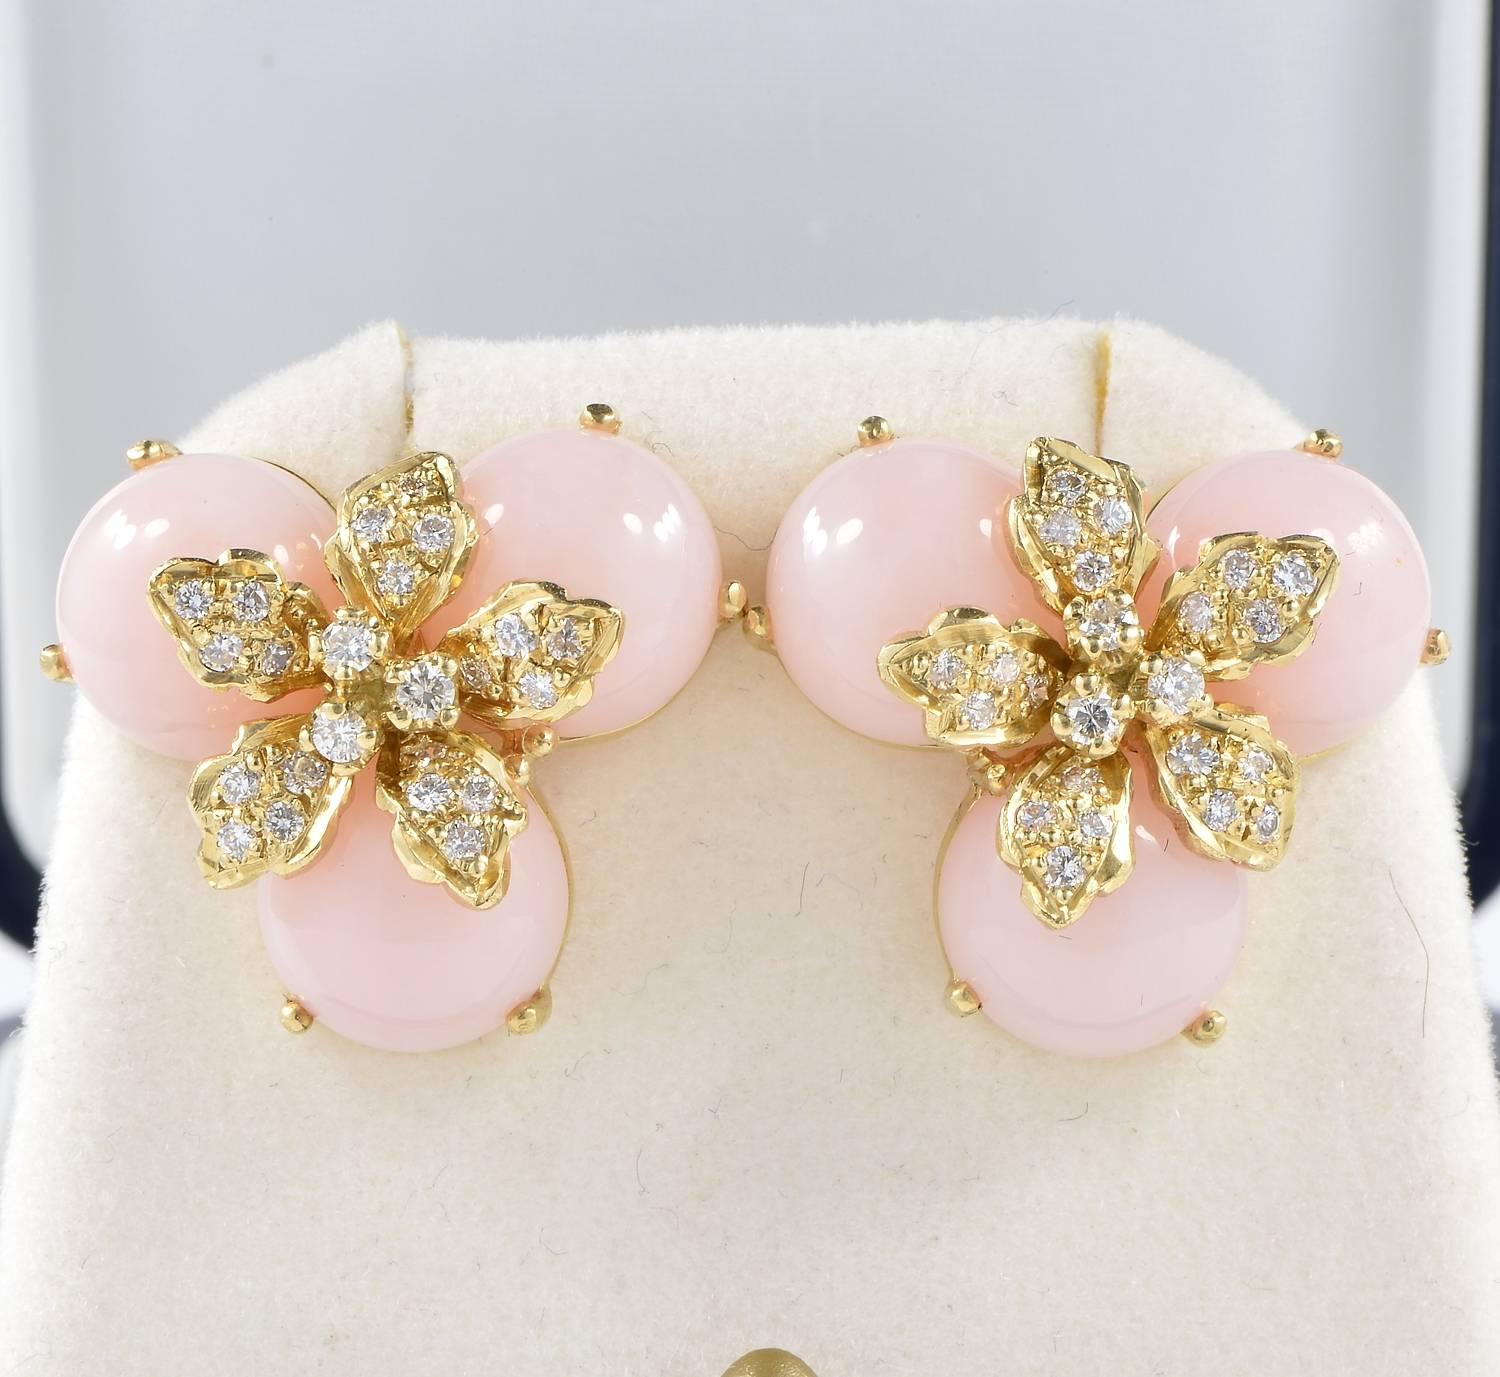 Sophisticate, finely designed and crafted, exclusive pair of vintage earrings set with natural Pink Opal and Diamonds.
Gorgeous flowers in between the composition of Pink Opals. 
Fully highlighted by Diamonds, approx 1.0 Ct rated G VVS/VS
Italian